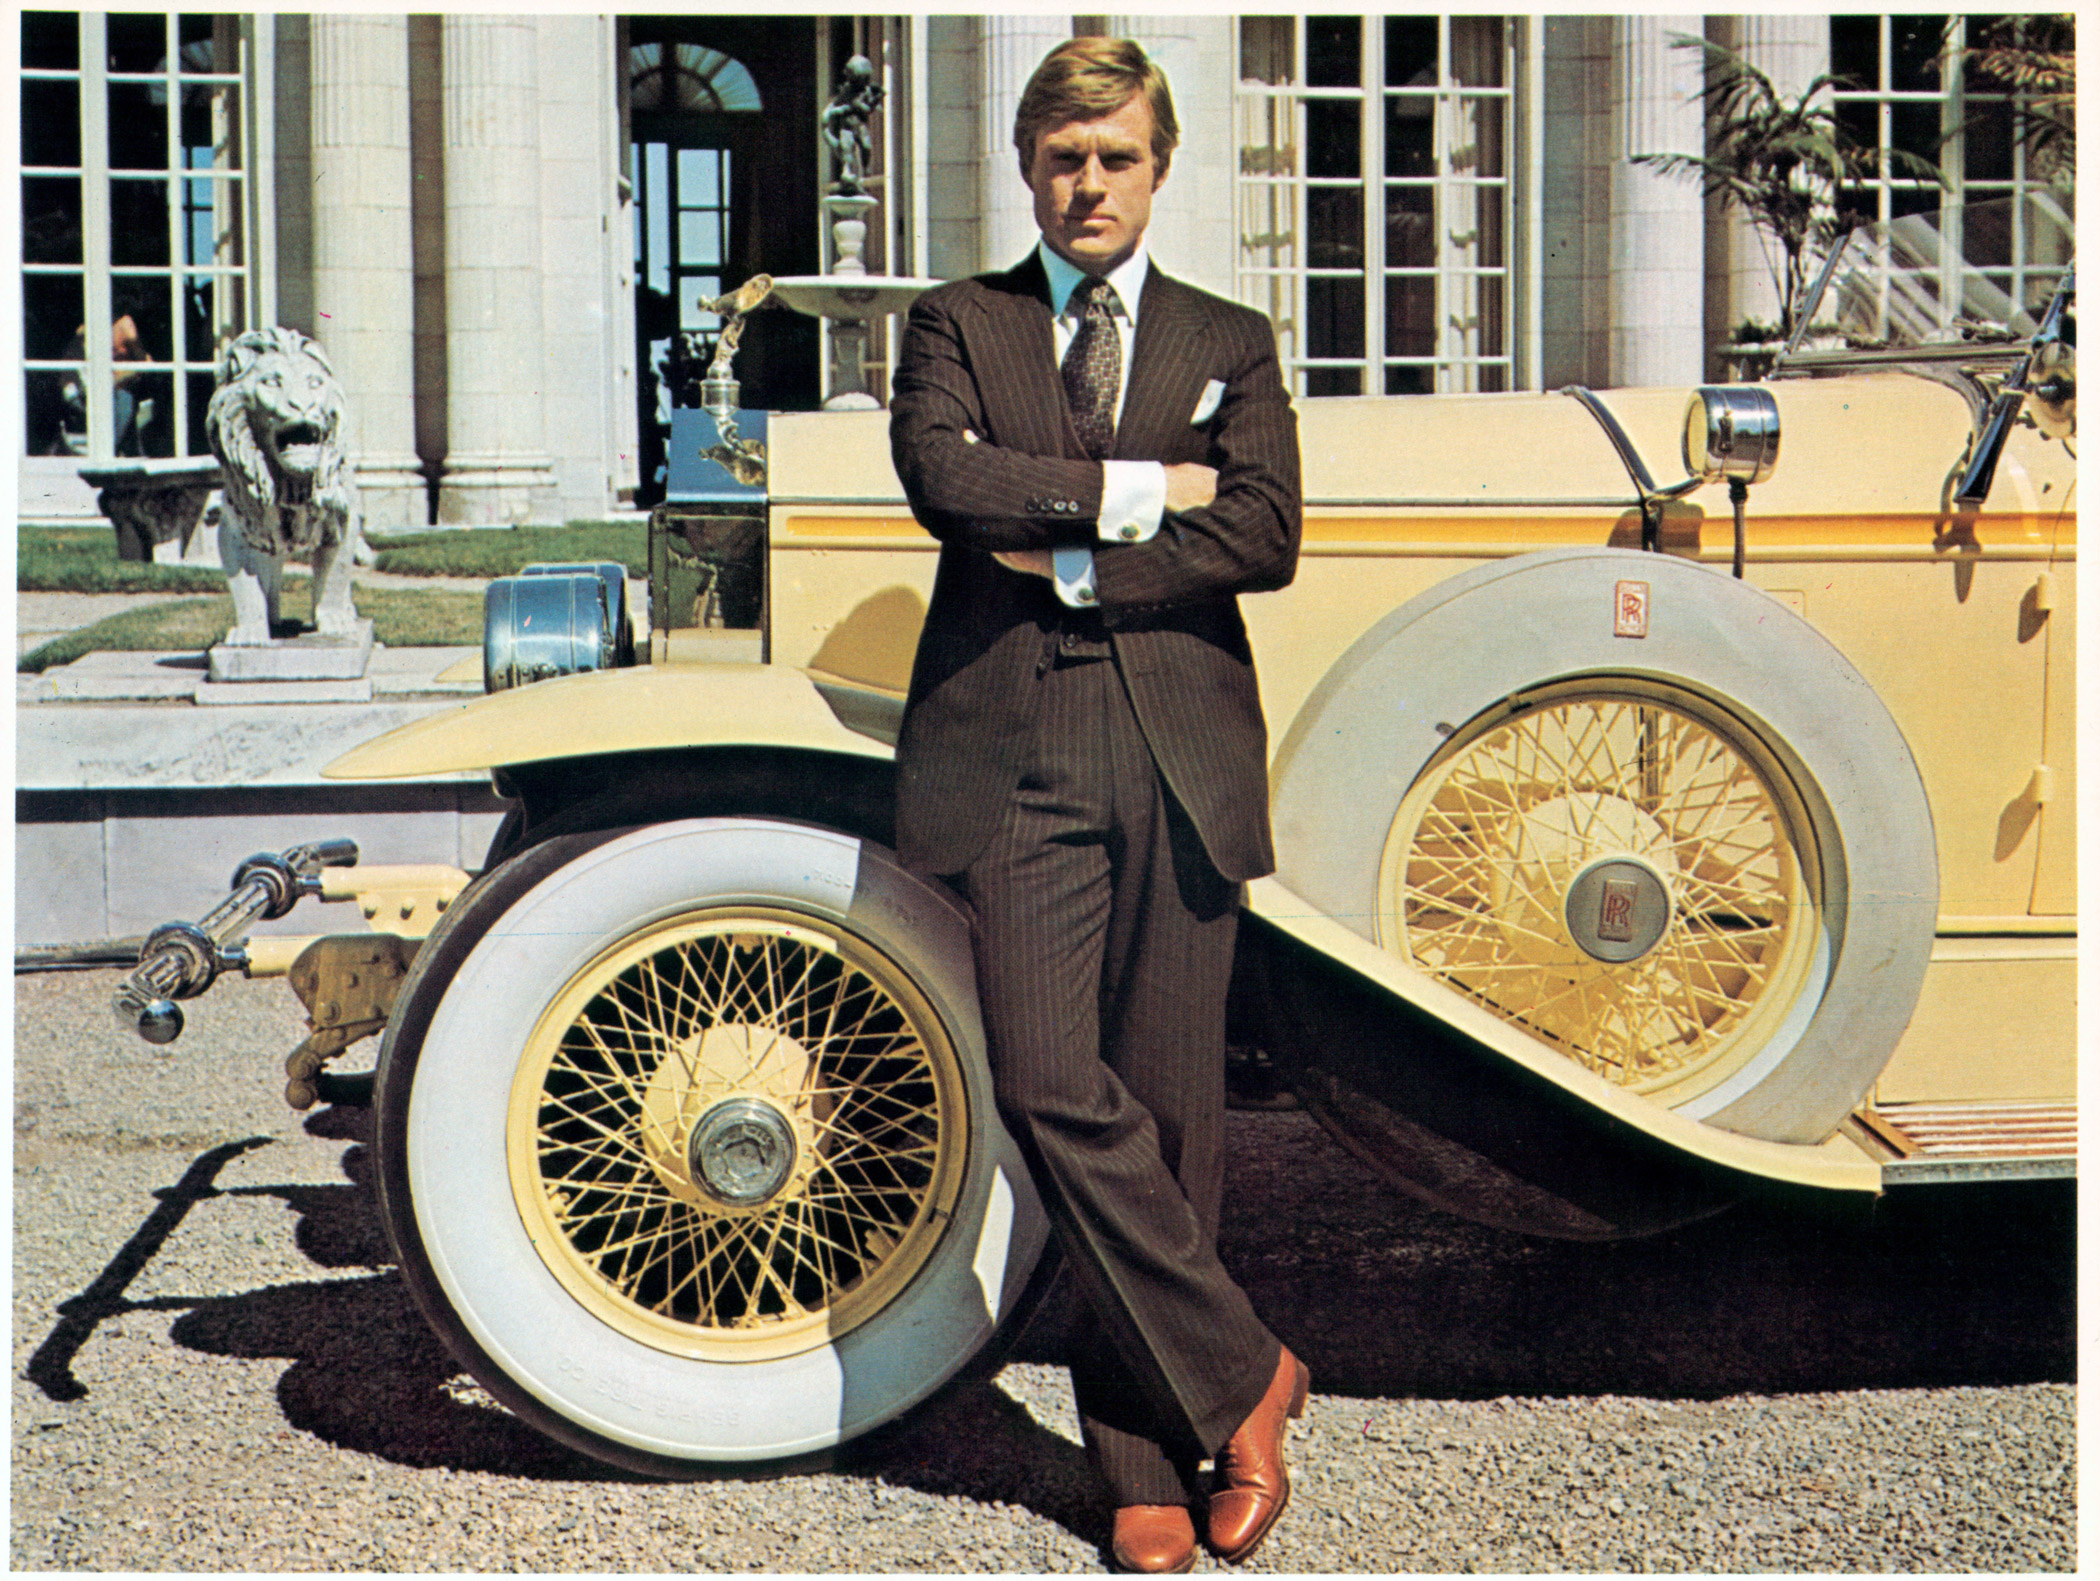 Robert Redford, wearing a Ralph Lauren suit, leaning against luxurious car in a scene from the film The Great Gatsby, 1974.